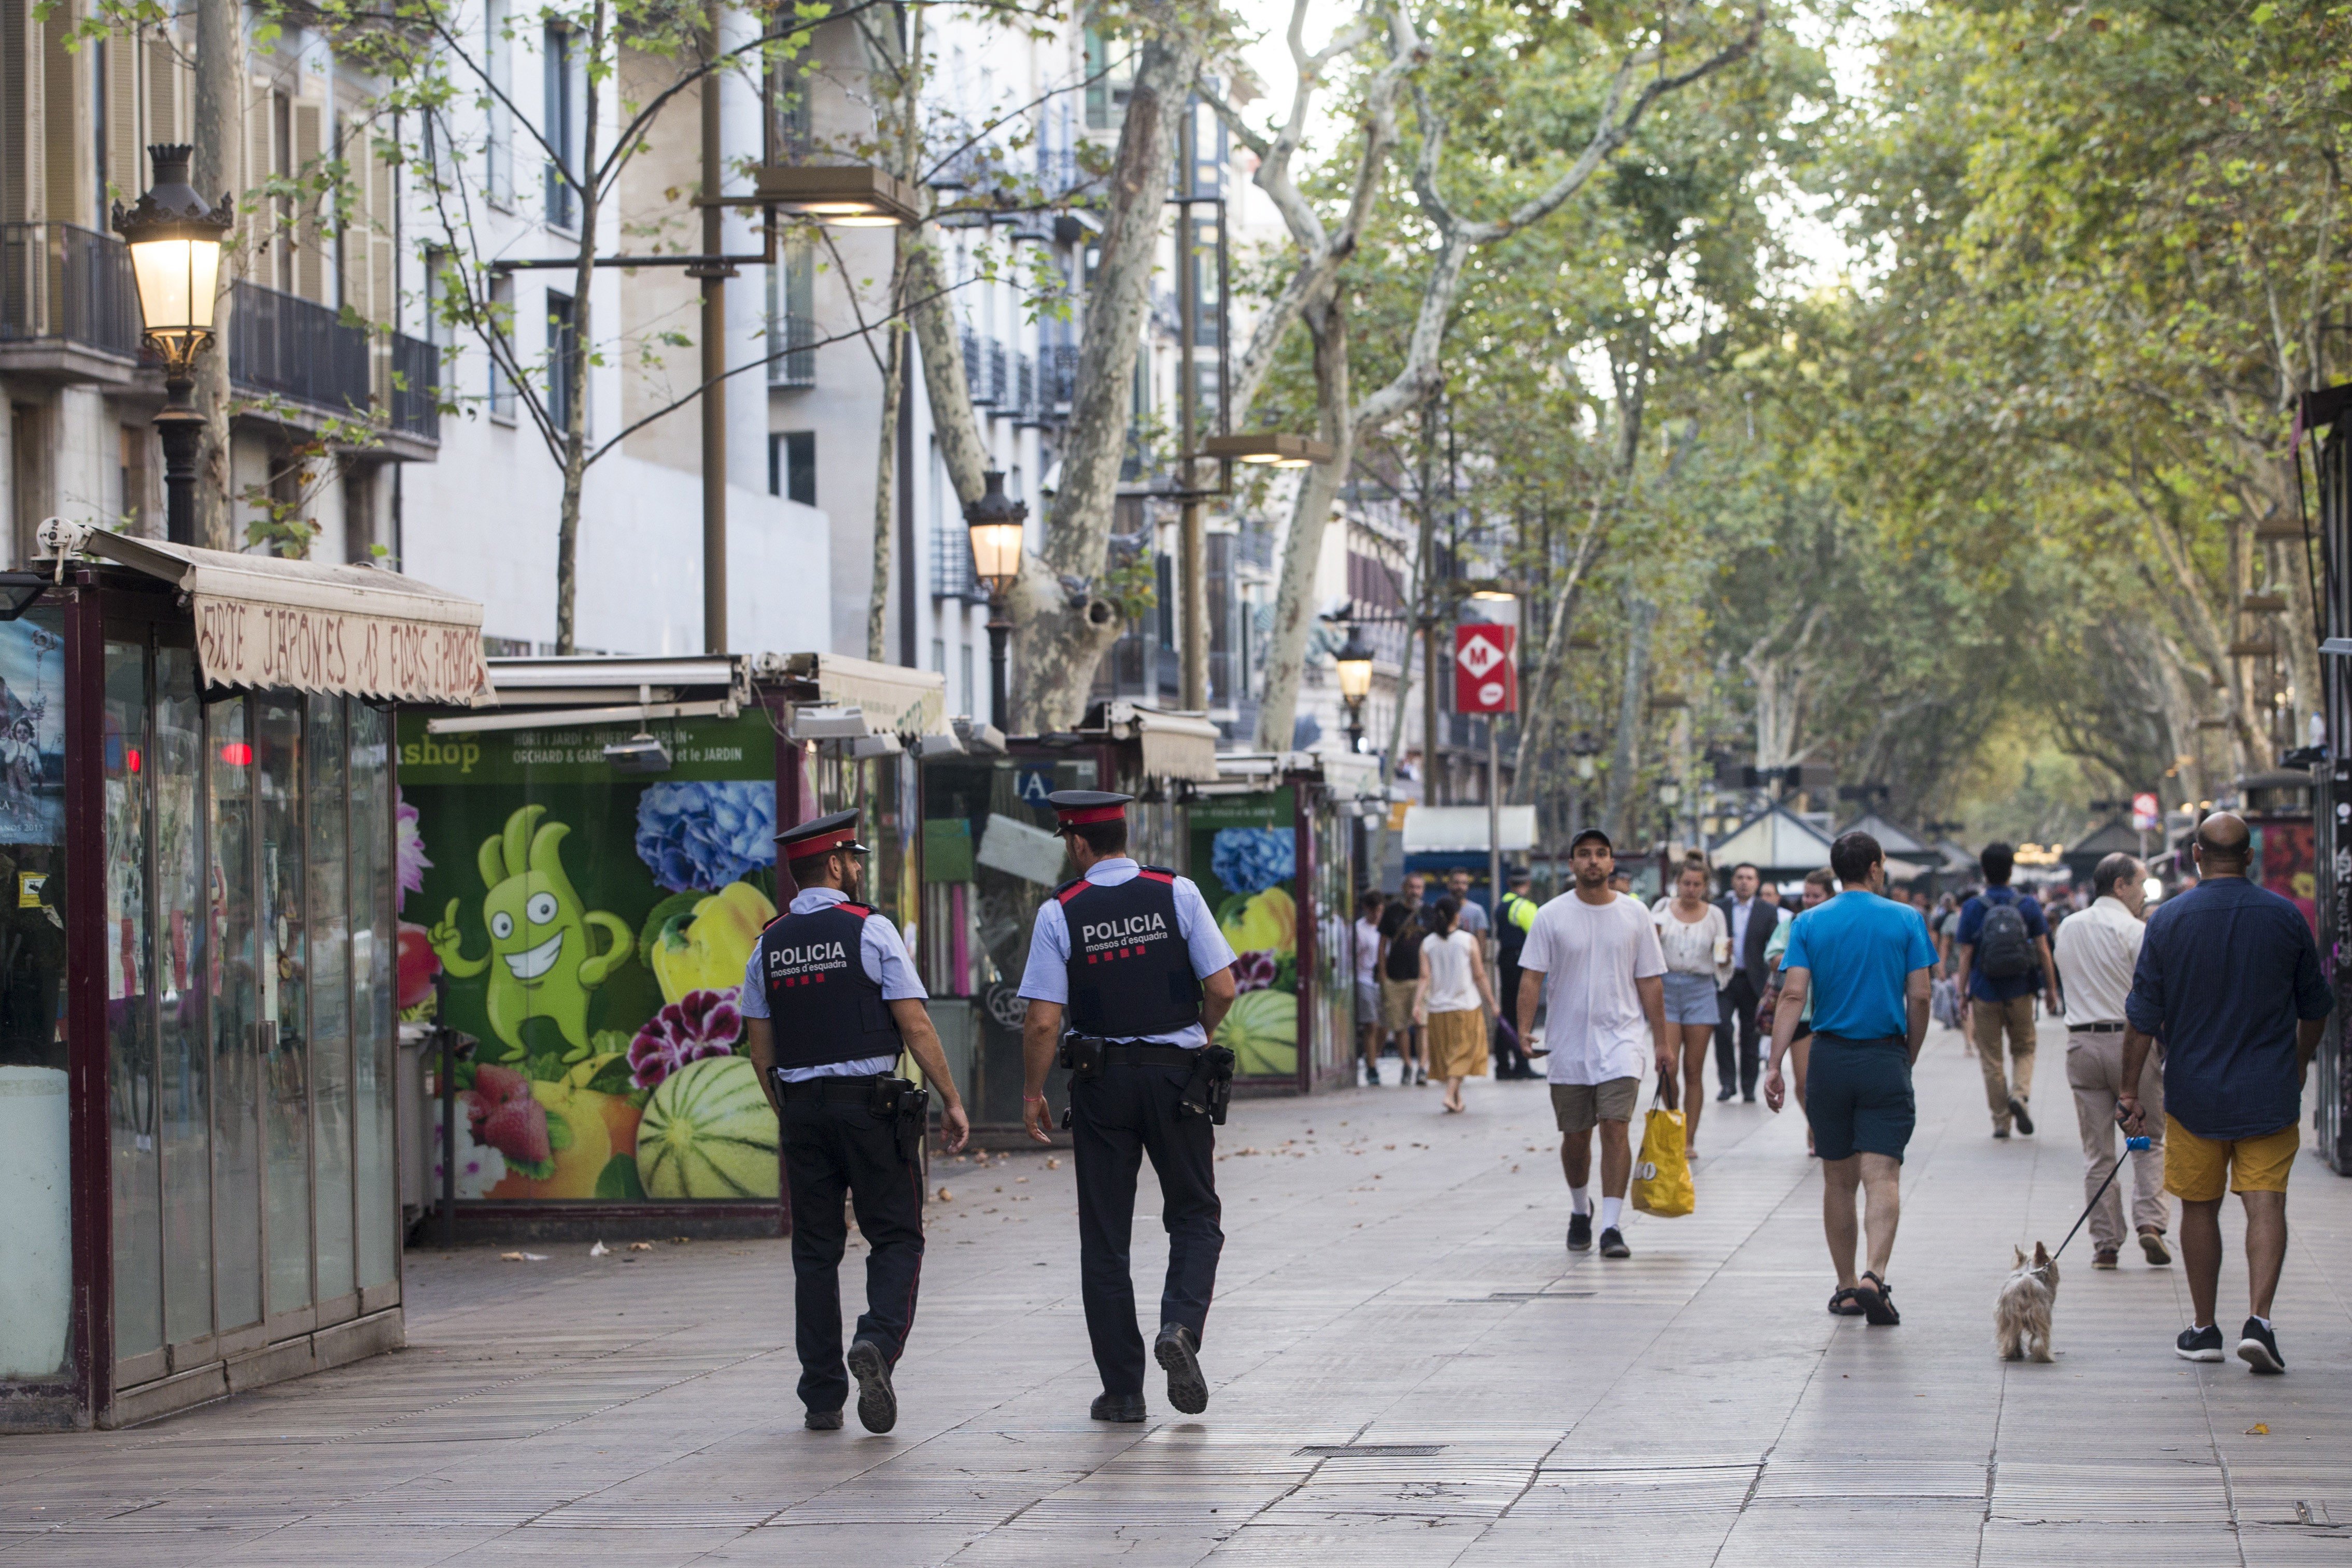 Warning of possible terrorist threat in Barcelona received by Catalan police